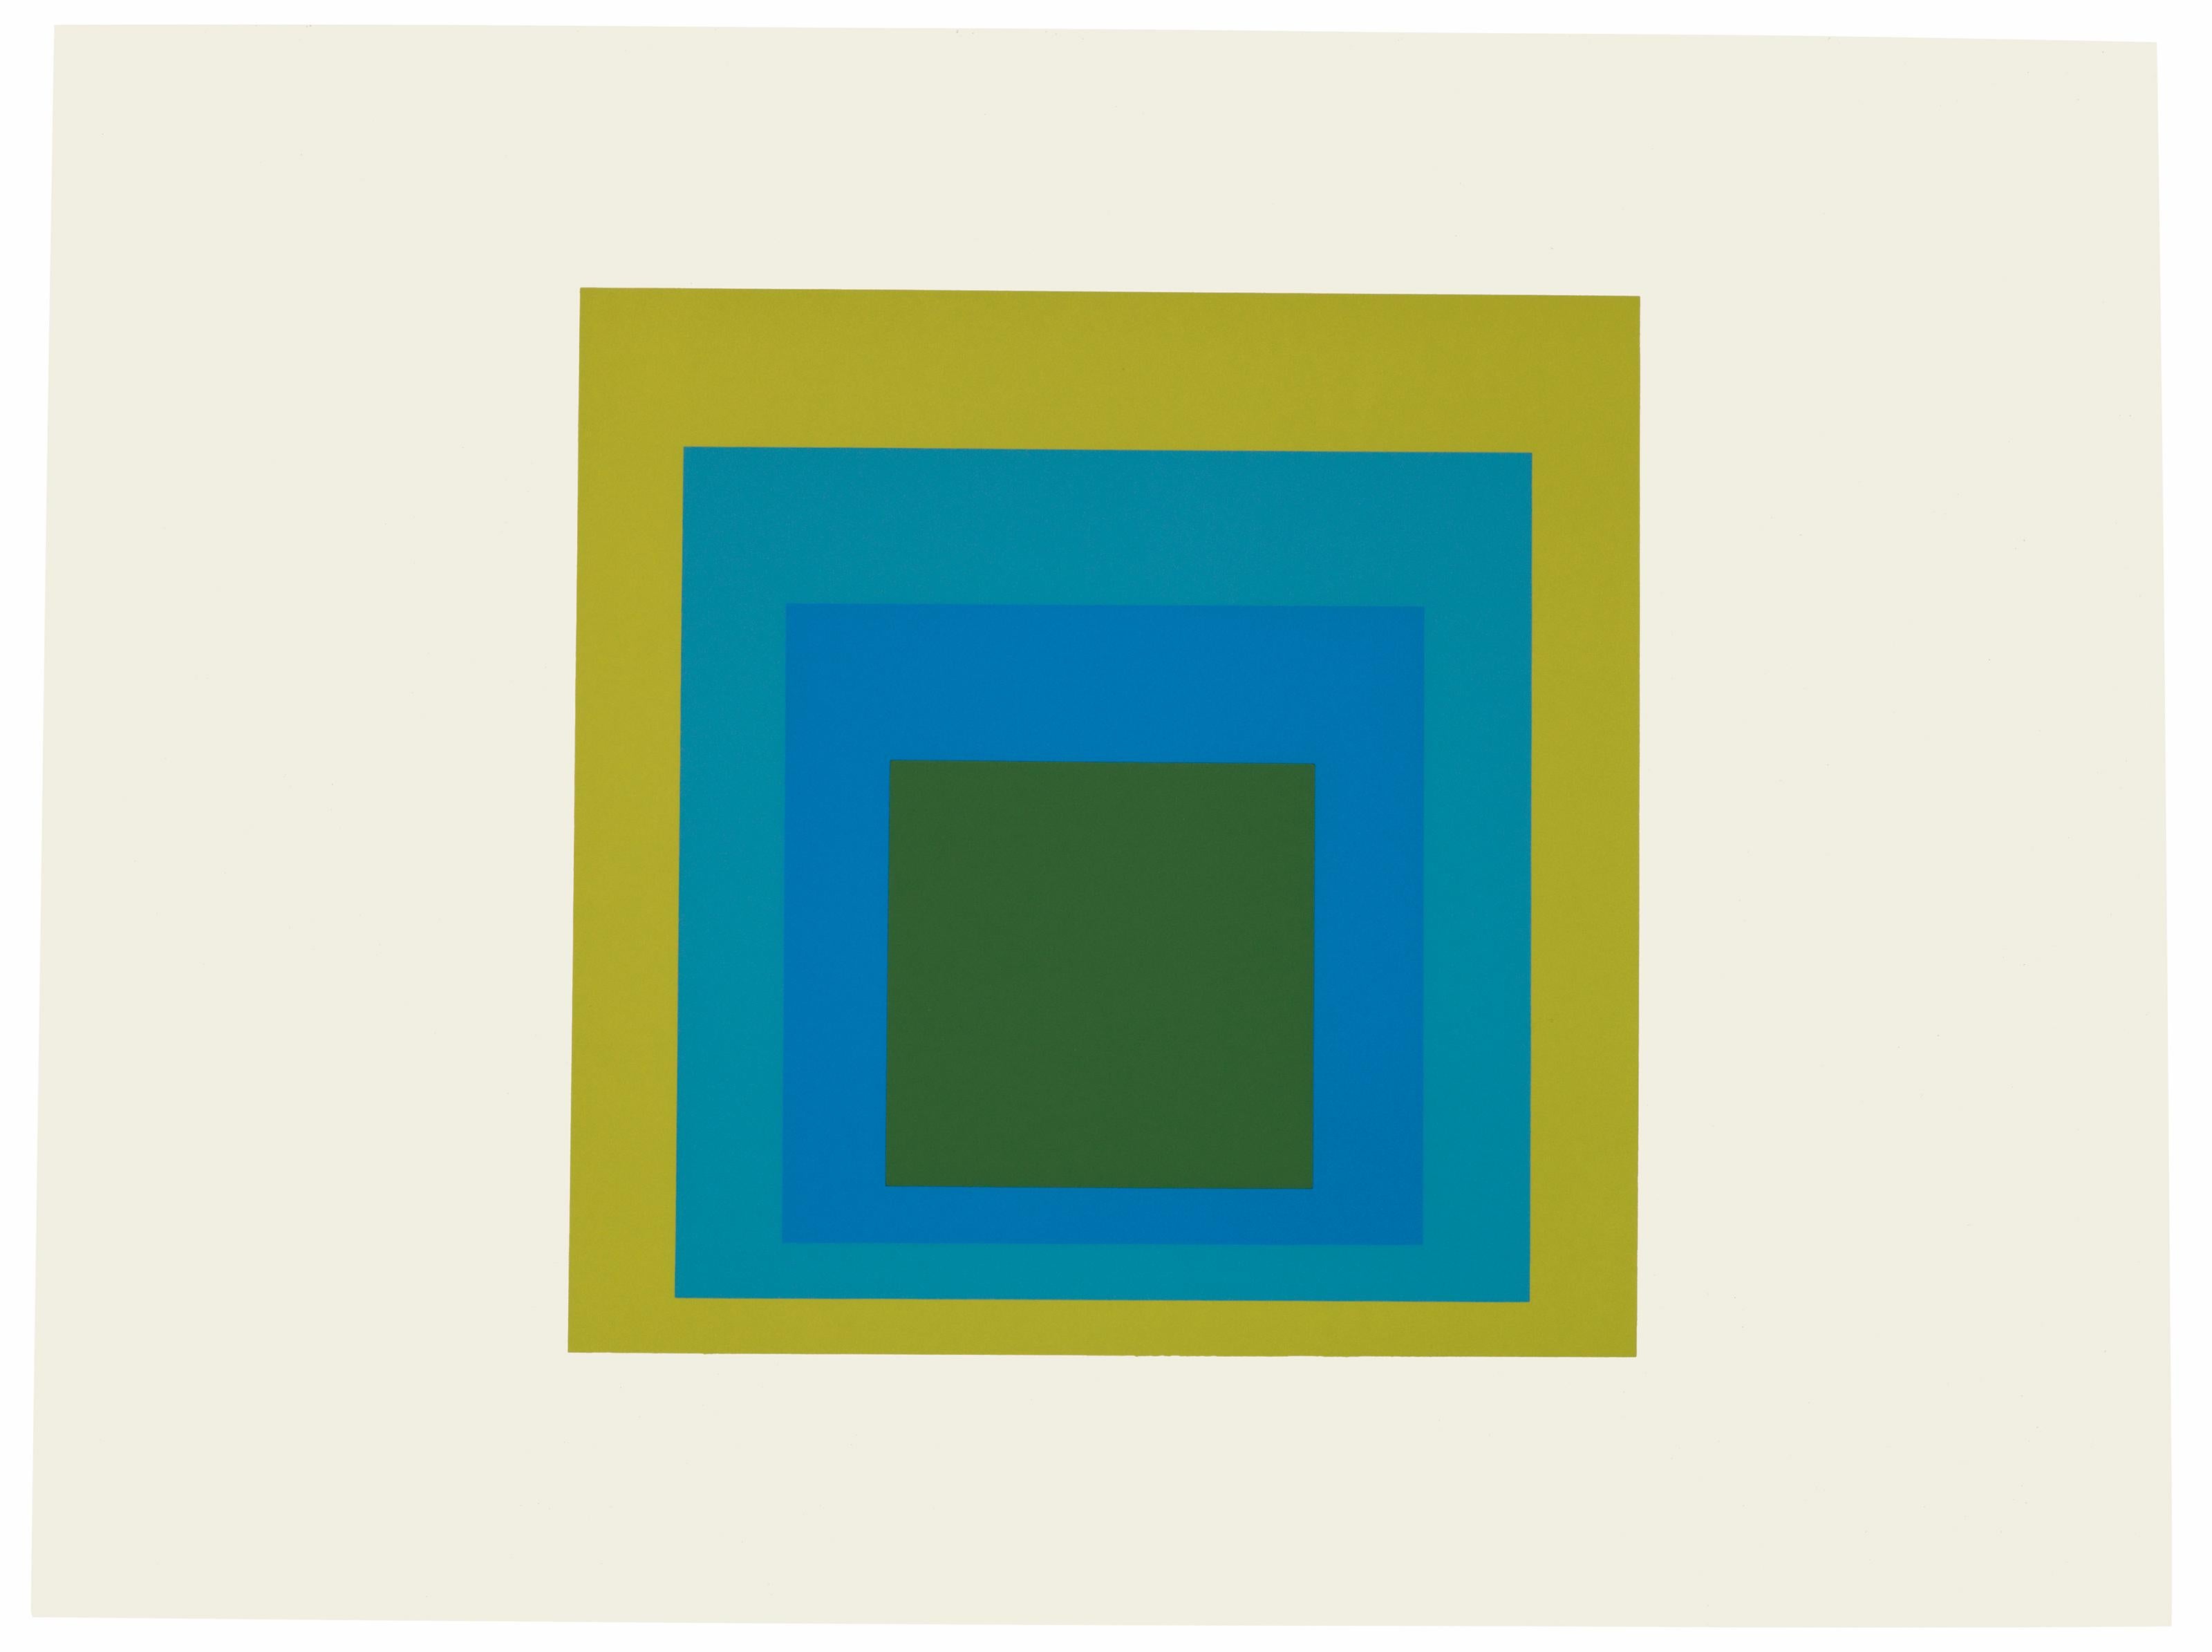 Formulation: Articulation I & II -- Colour Theory, Minimalism by Josef Albers 2